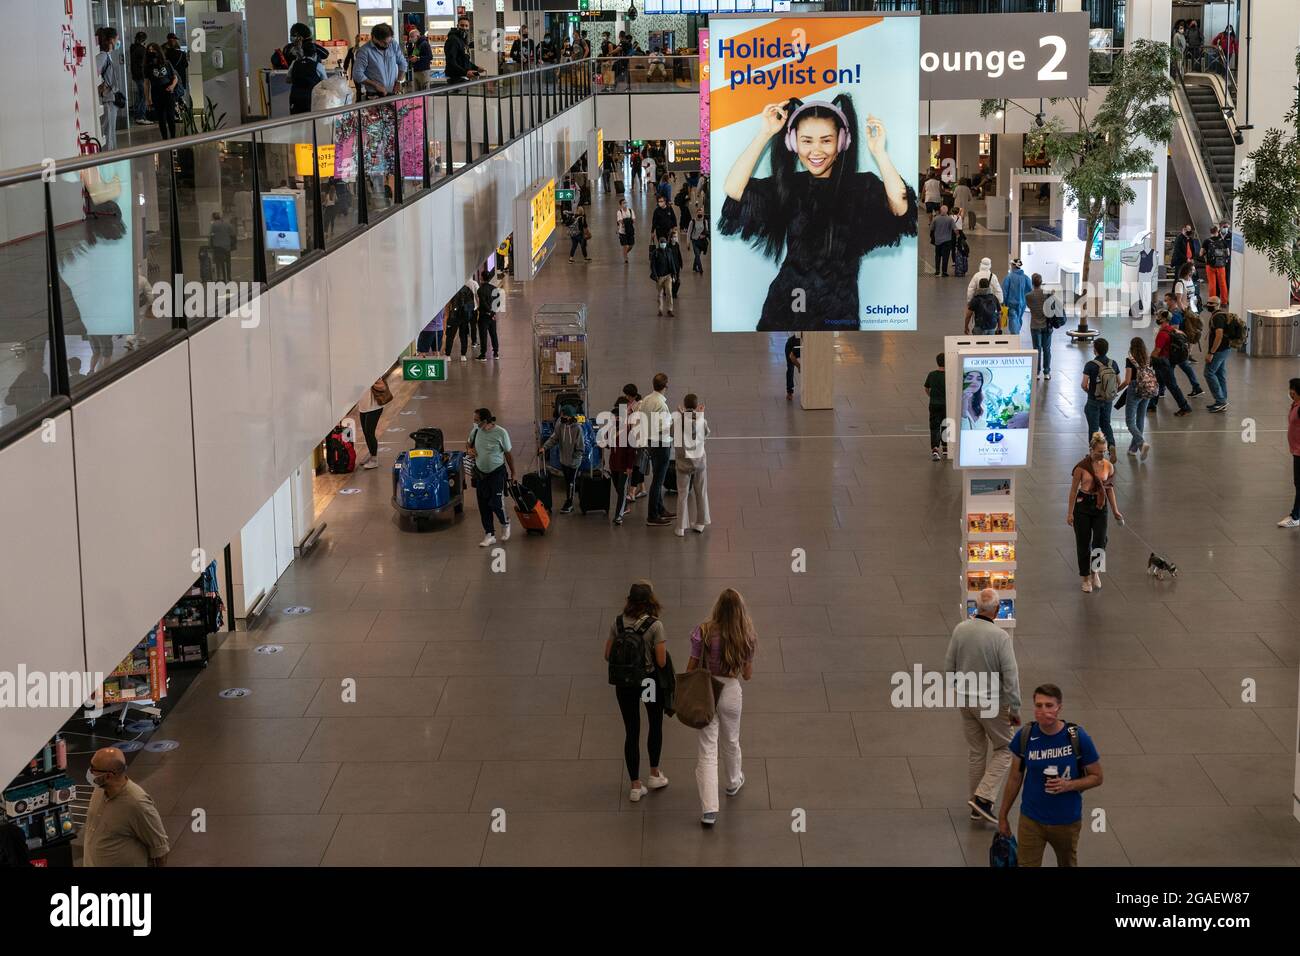 Amsterdam, the Netherlands - July 29, 2021: Travelers walk through Shiphol airport. Fully vaccinated travelers are allowed to travel during pandemic but required to wear masks at airports and while on aircrafts. Stock Photo